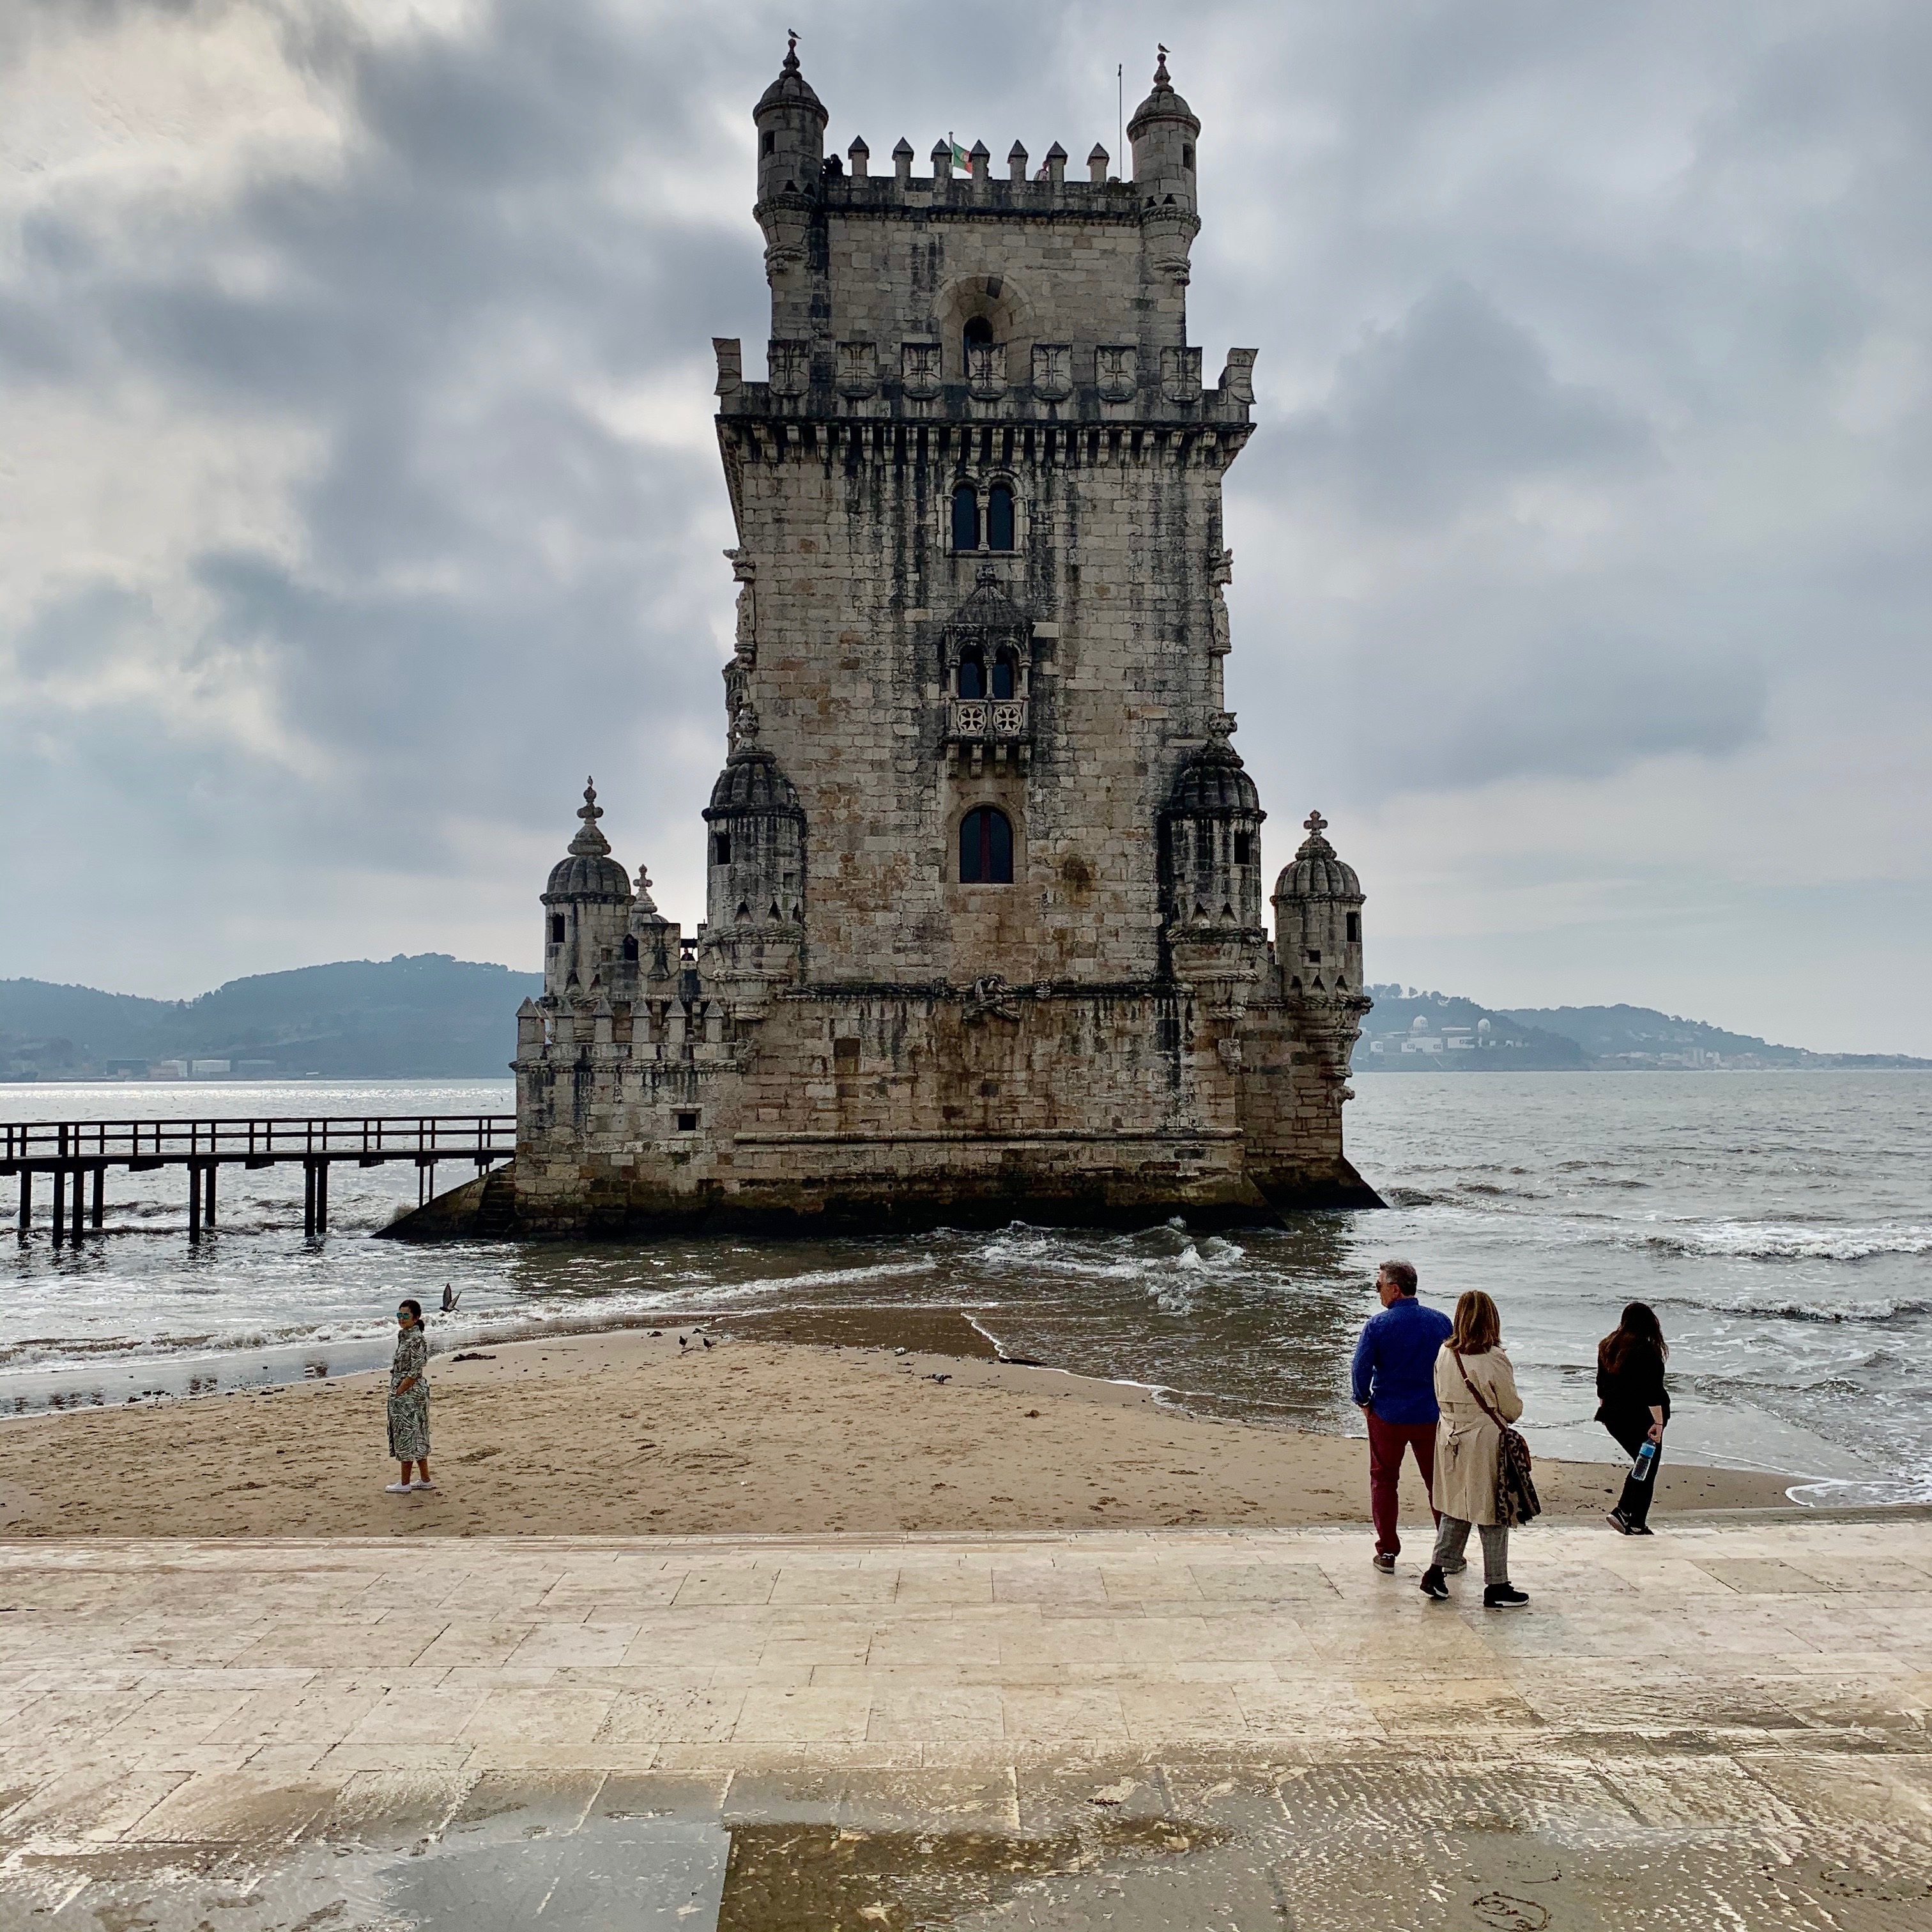 Monastery of the Hieronymites and the Tower of Belém in Lisbon, Portugal